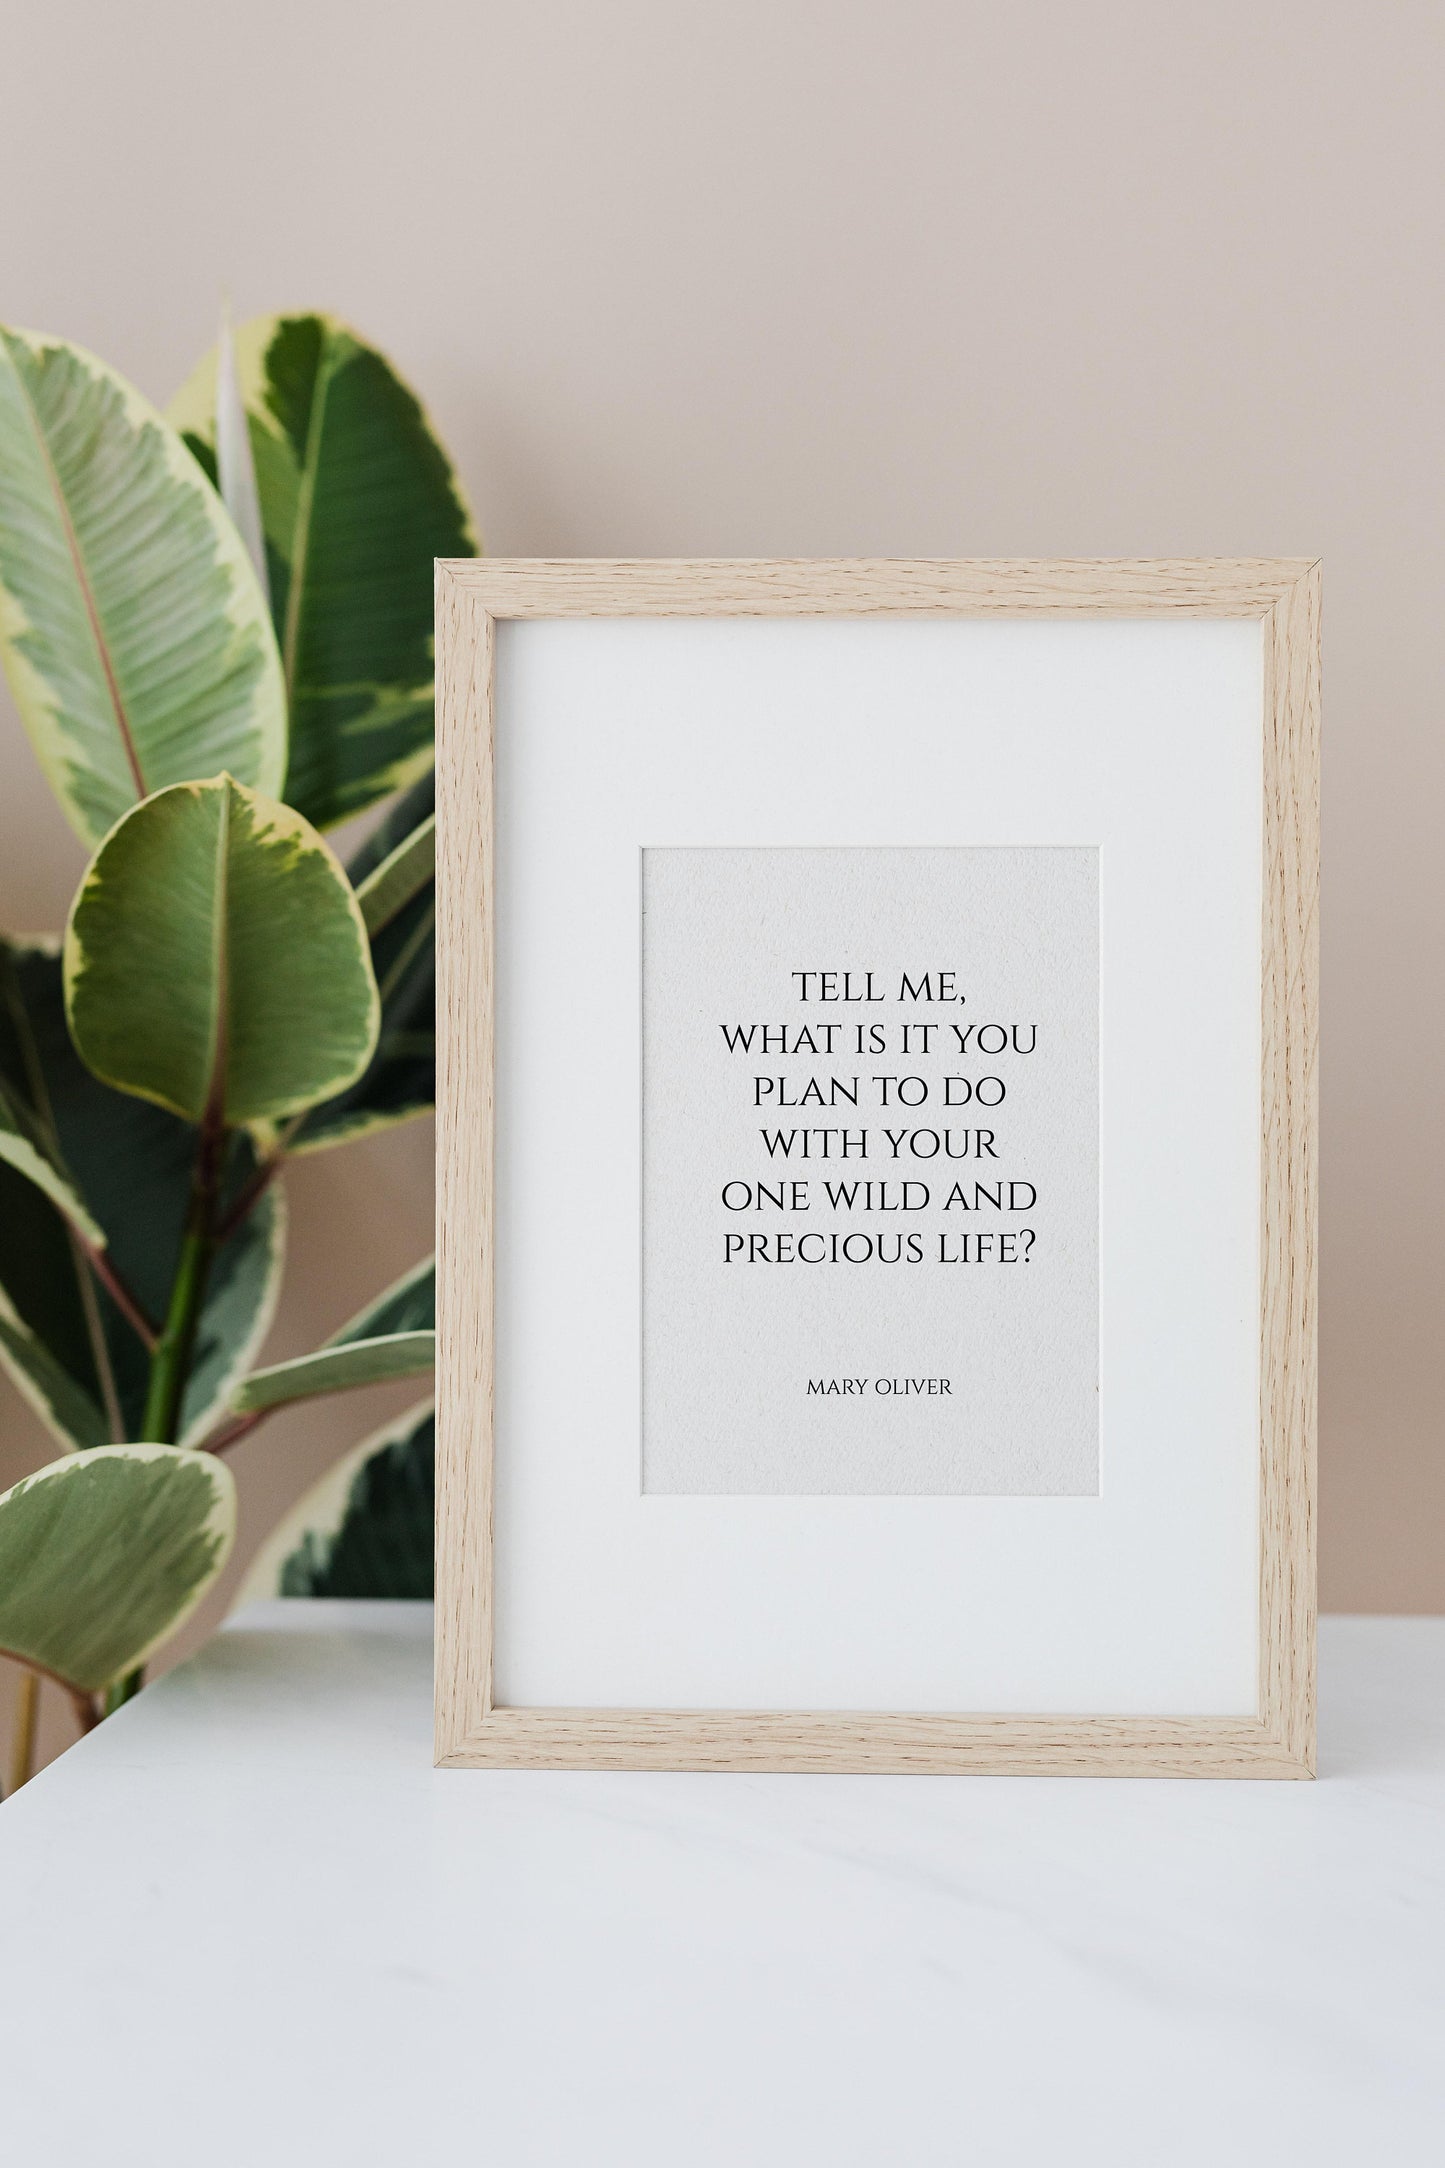 Mary Oliver Quote, Tell me, what is it you, plan to do, wild and, precious life, Poetry, Book Quotes, Poetry Print, Poem Quote, Framed poem